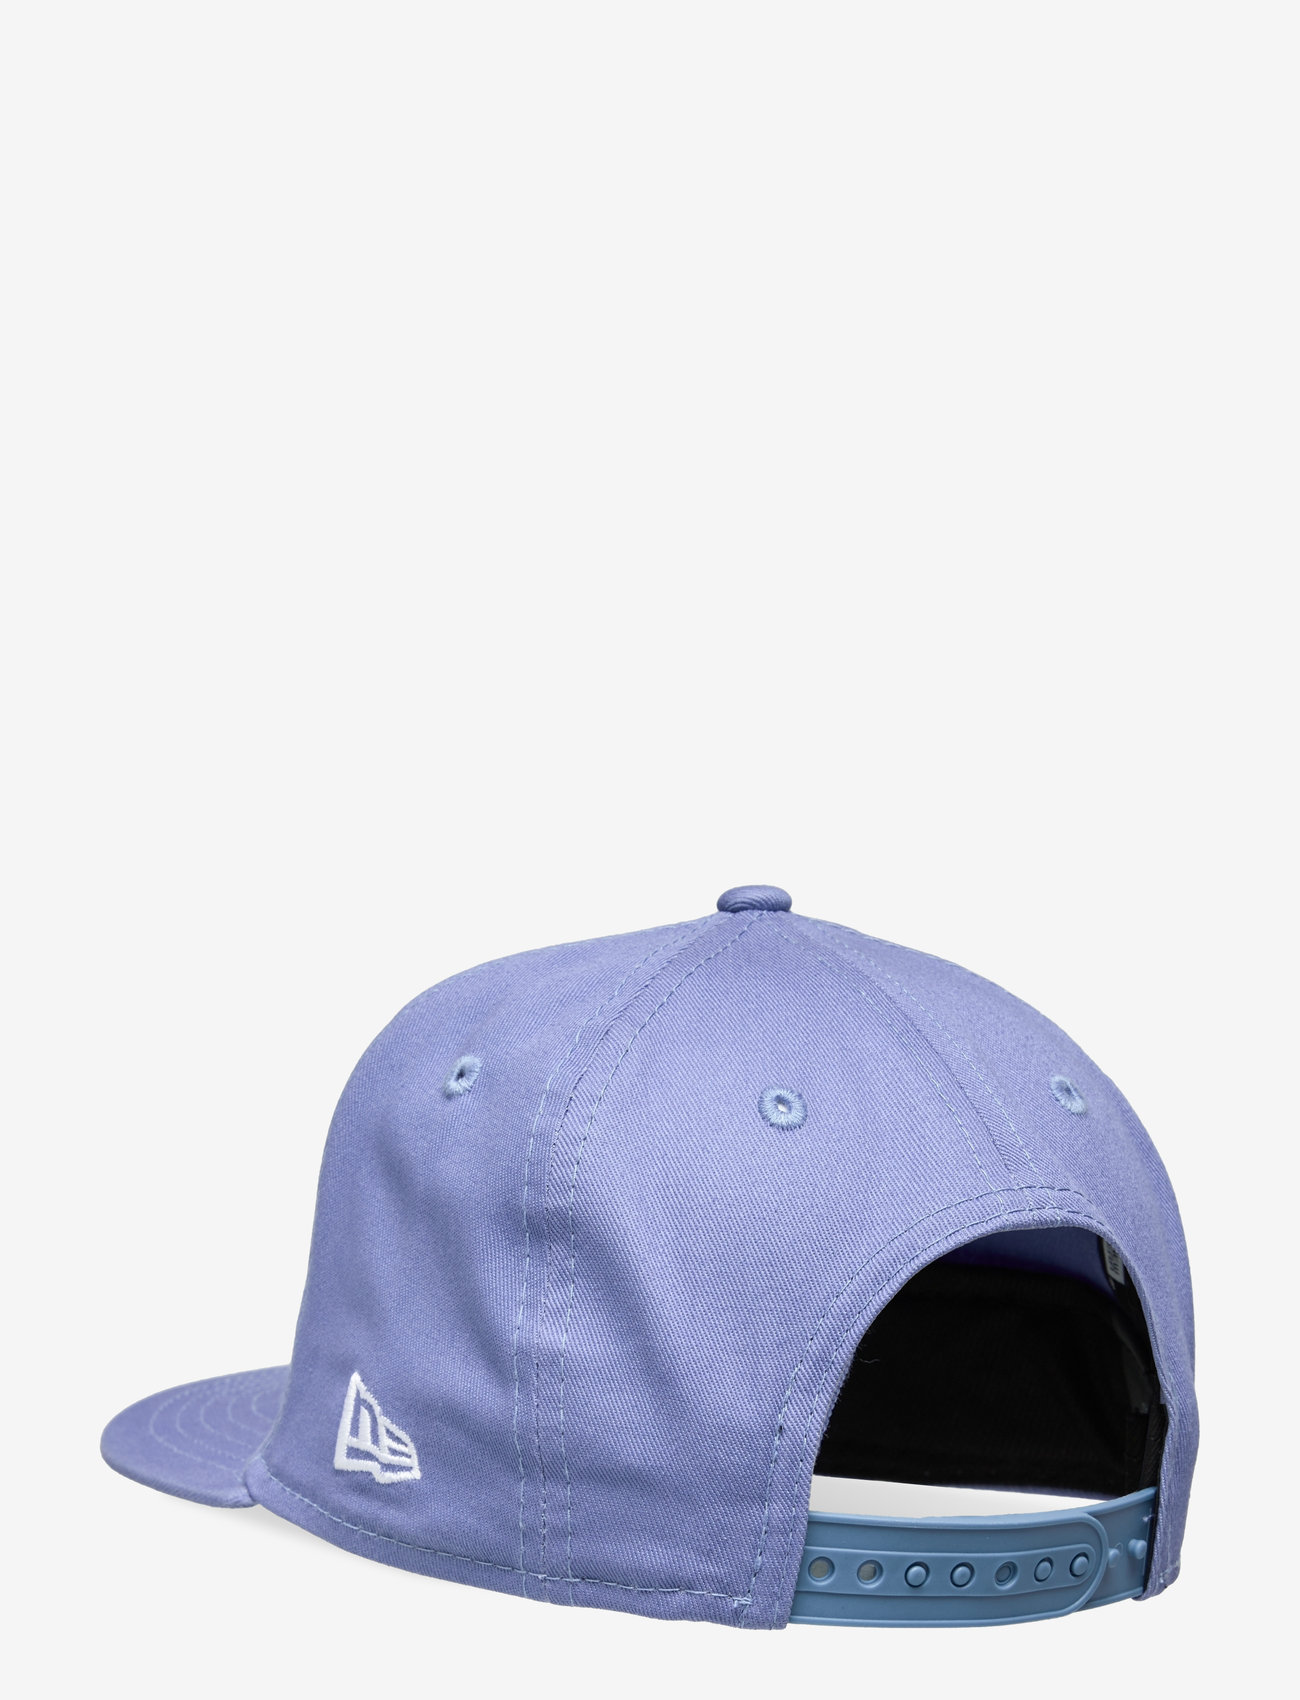 New Era - CHTY LEAGUE ESS 9FIFTY LOSDOD - sommerschnäppchen - cpbwhi - 1